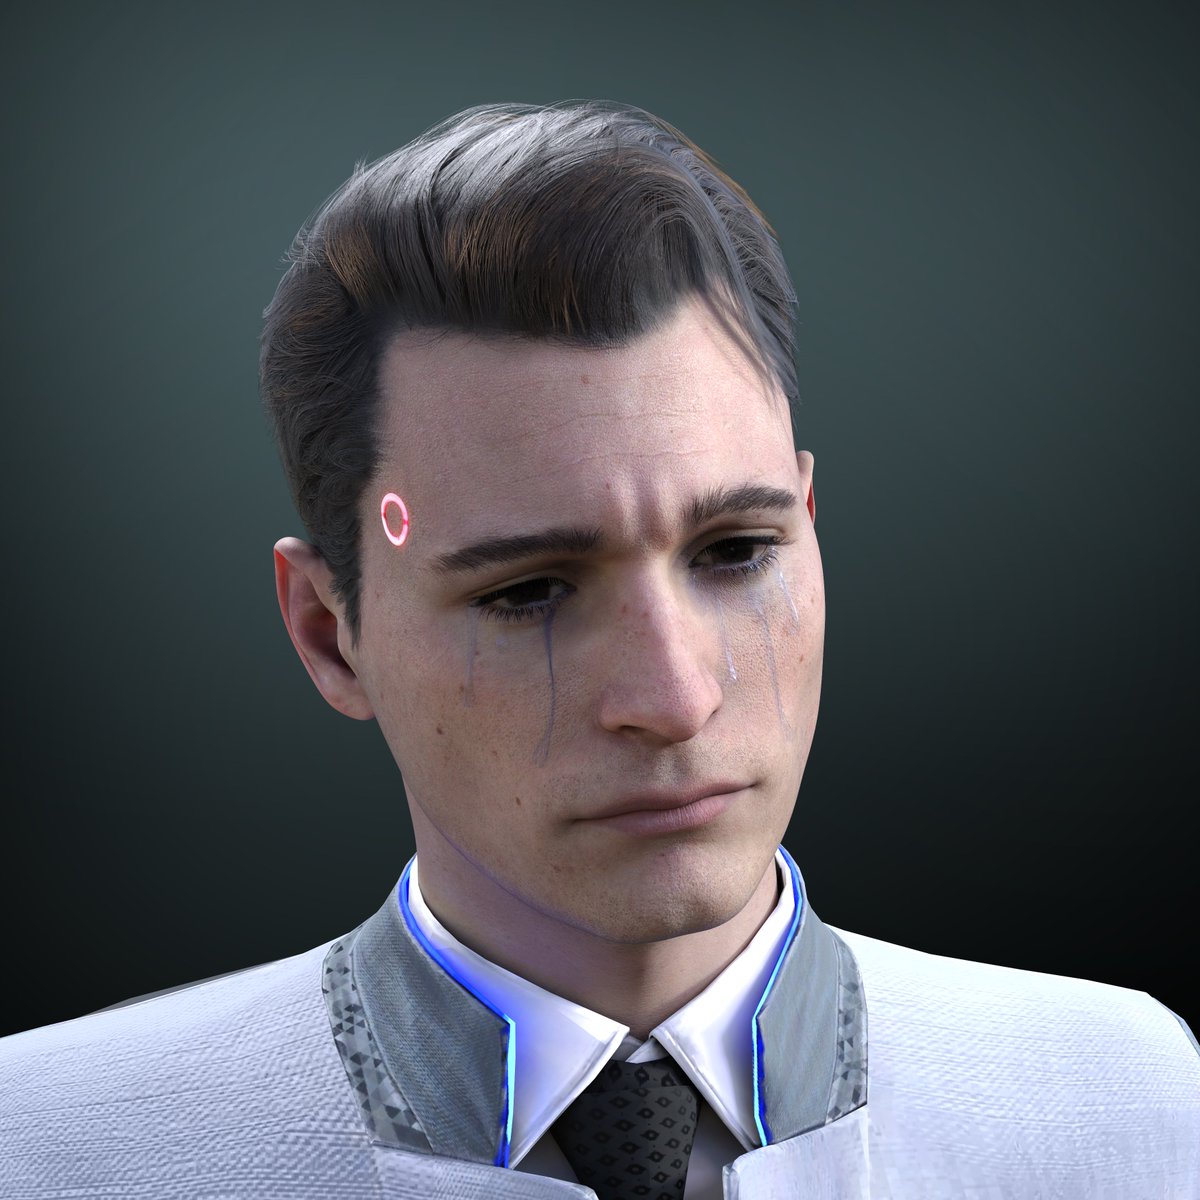 Connor crying thirium diluted tears, because I felt like it ^^'

#DetroitBecomeHuman #dbh
#dbhconnor #RK800 #3dart #3drender